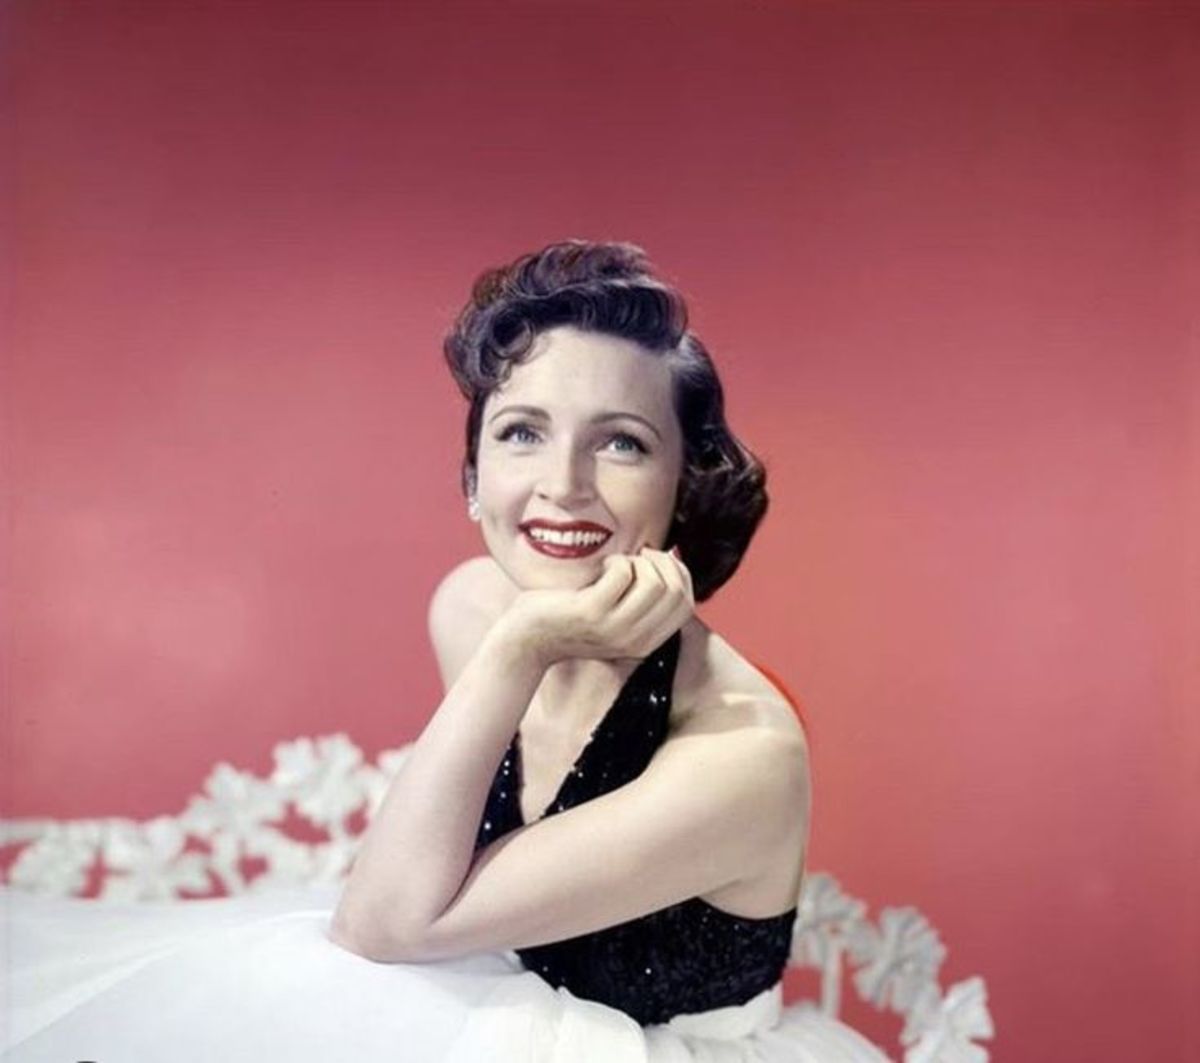 If young Betty White wasn't photogenic, there's no help for the rest of us.